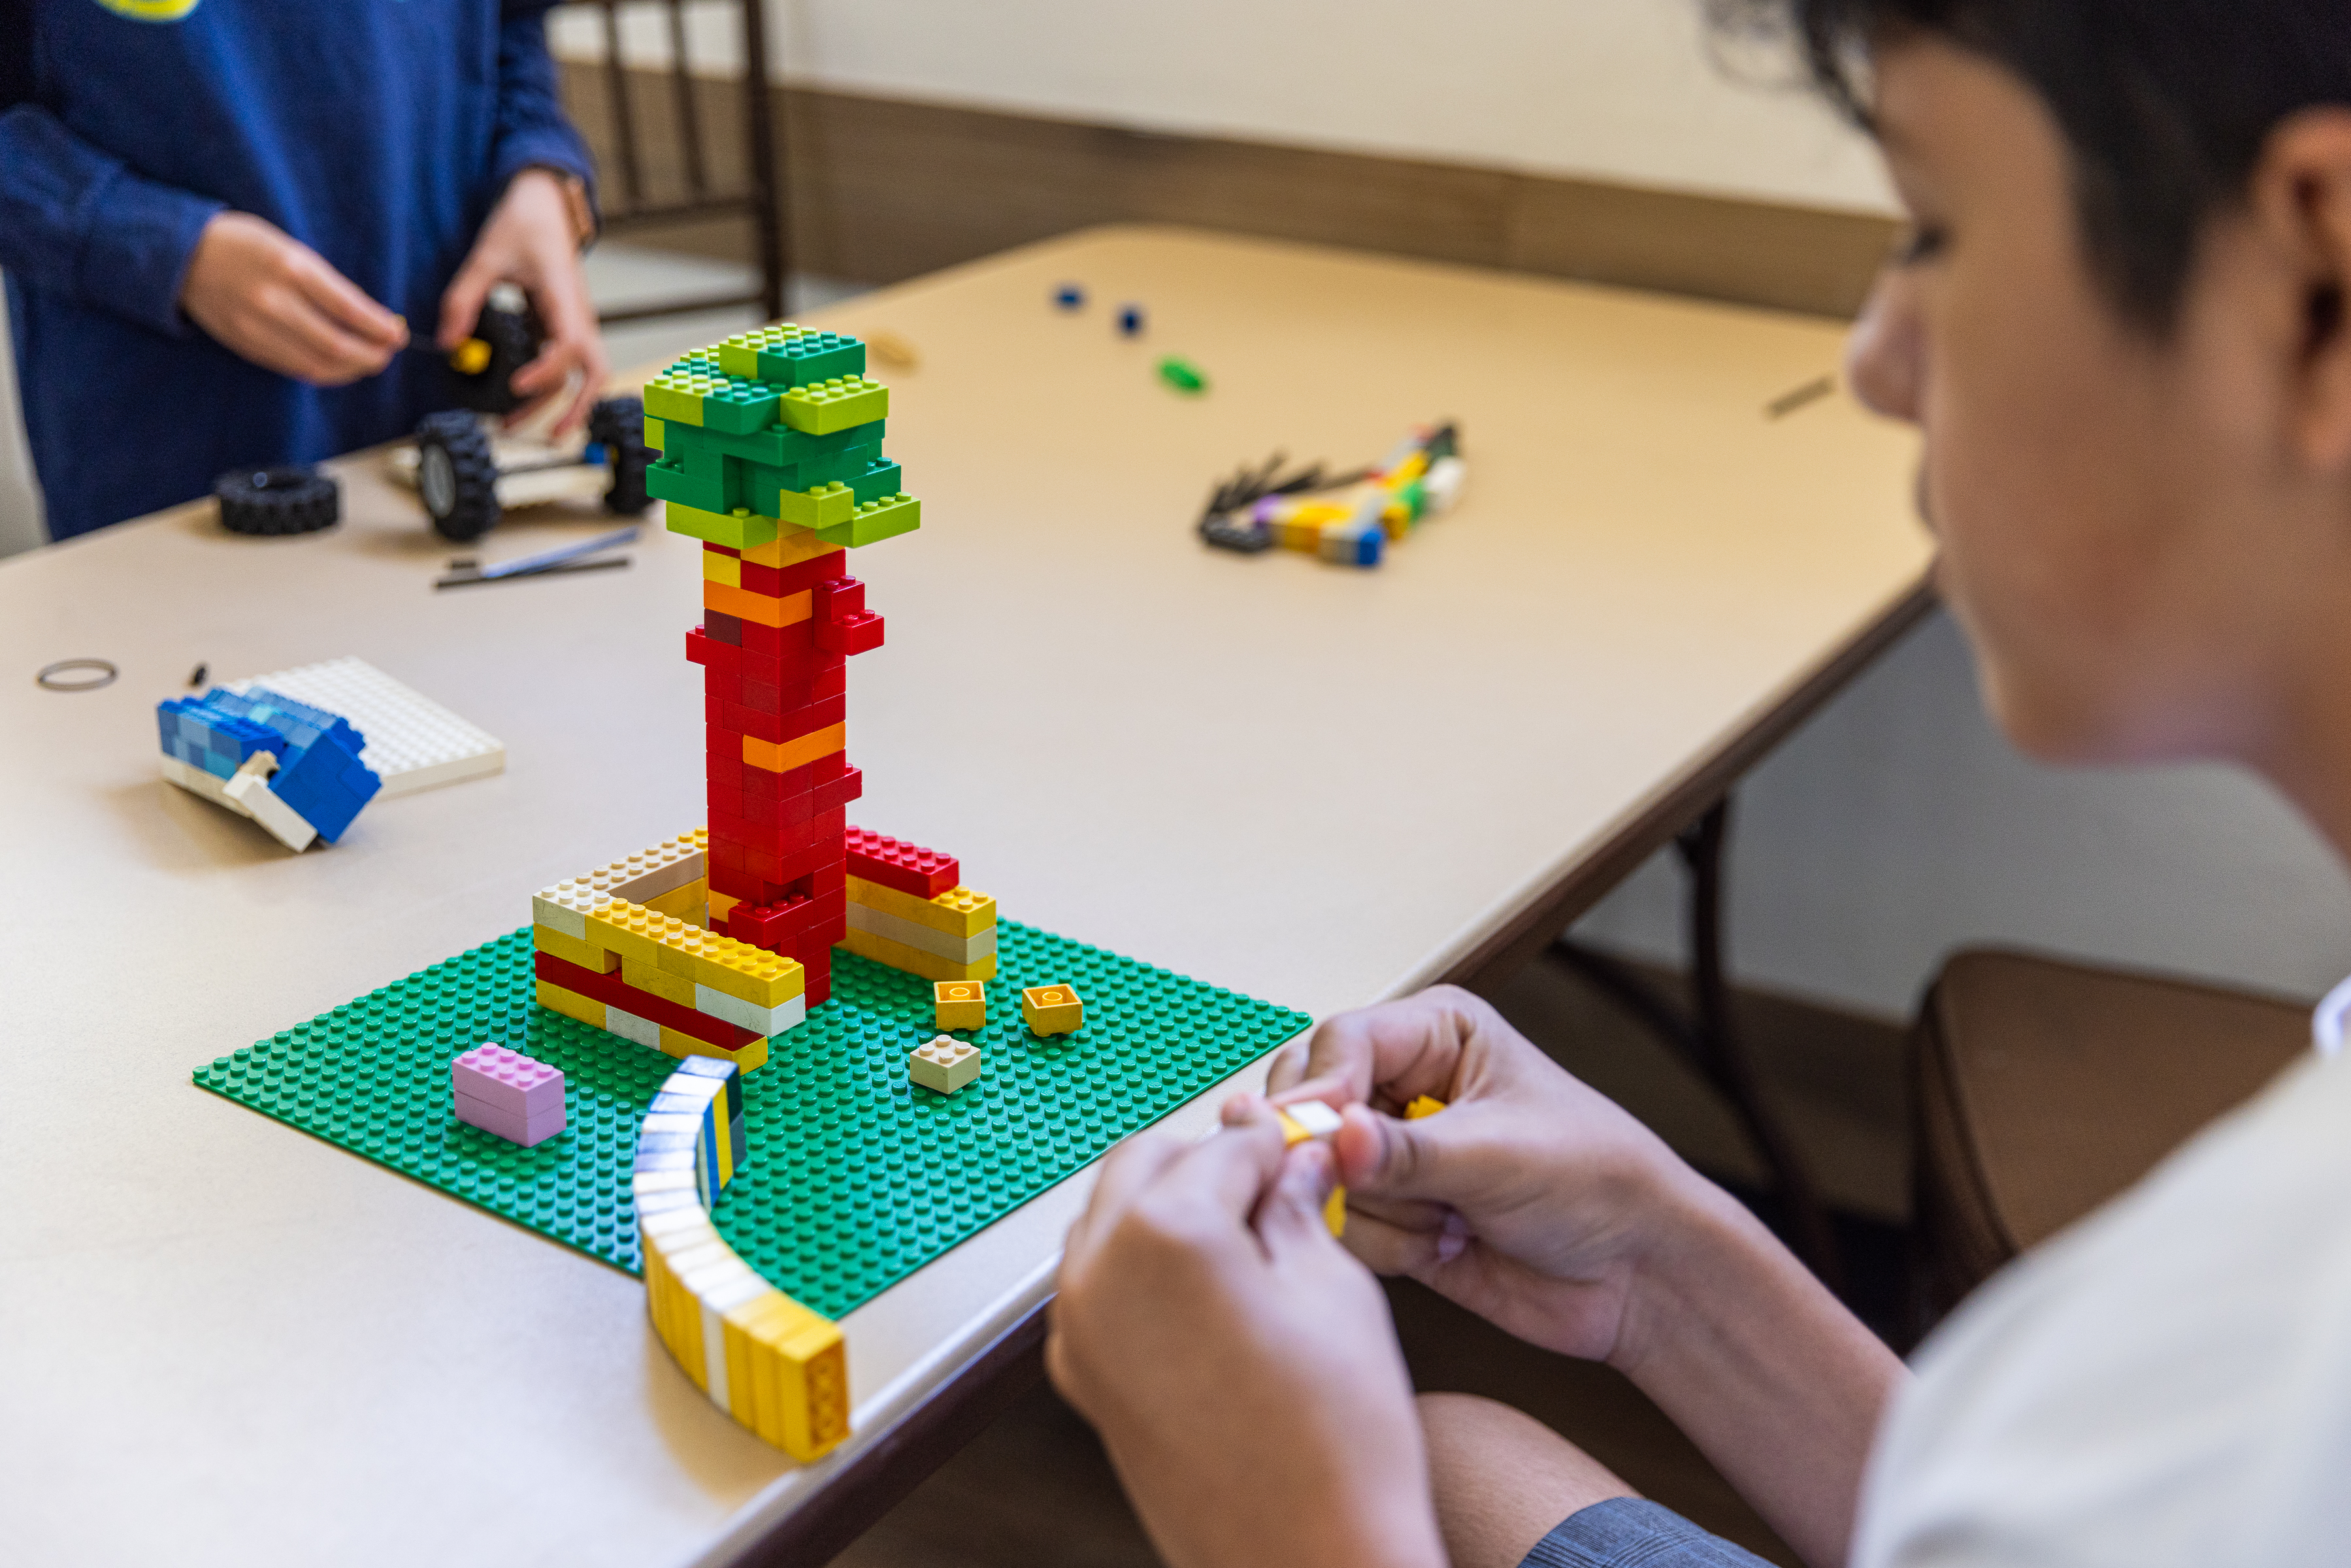 A camper works on their Lego creation with great focus